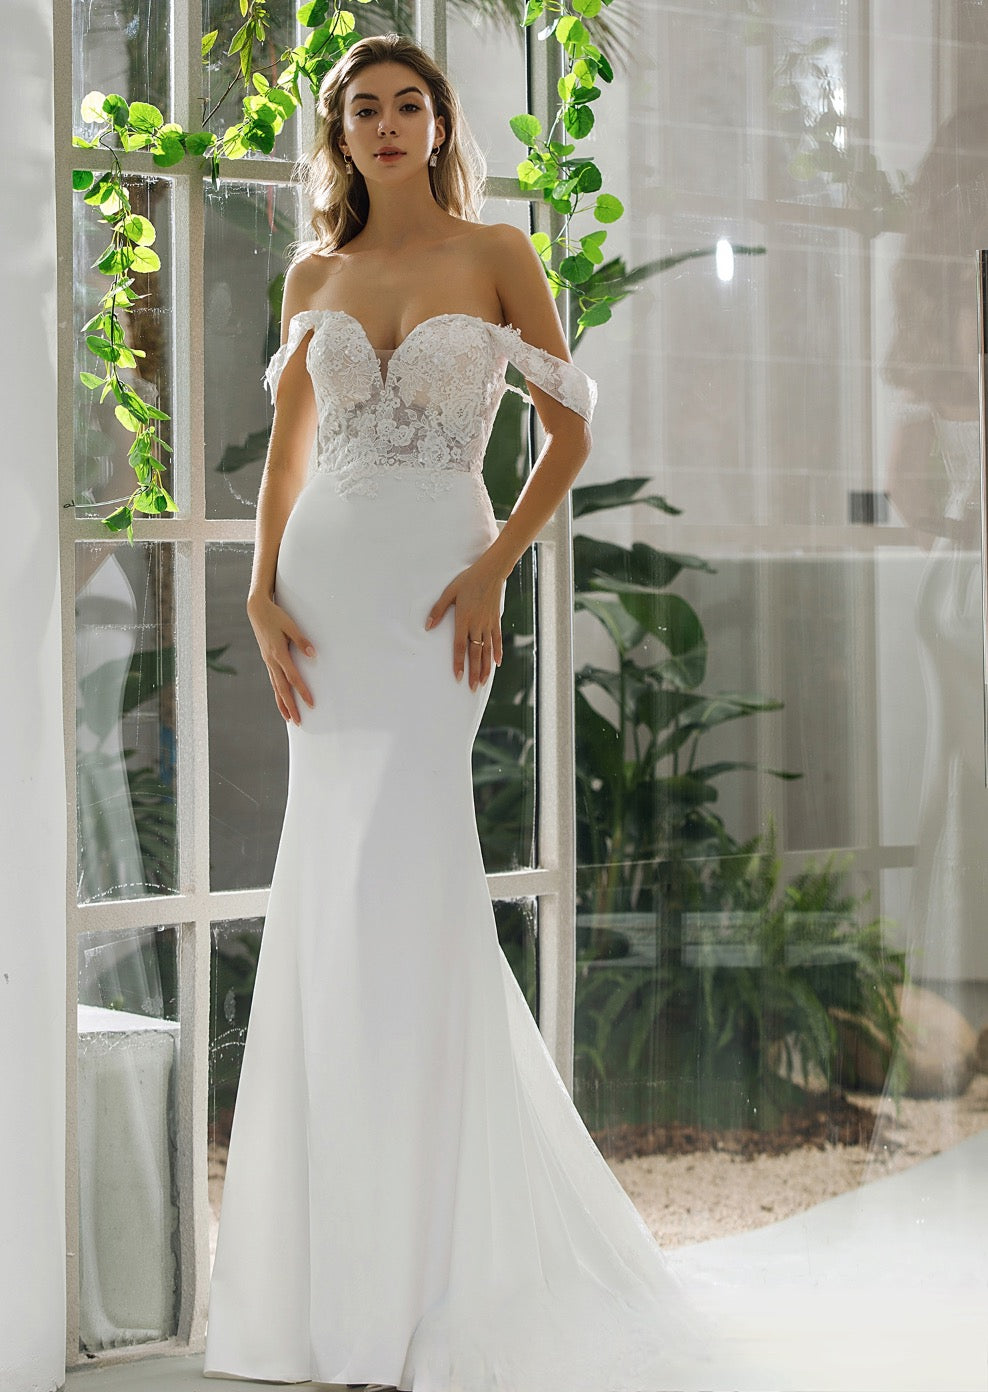 Sheath Crepe Bridal Gown With Off-Shoulder Straps